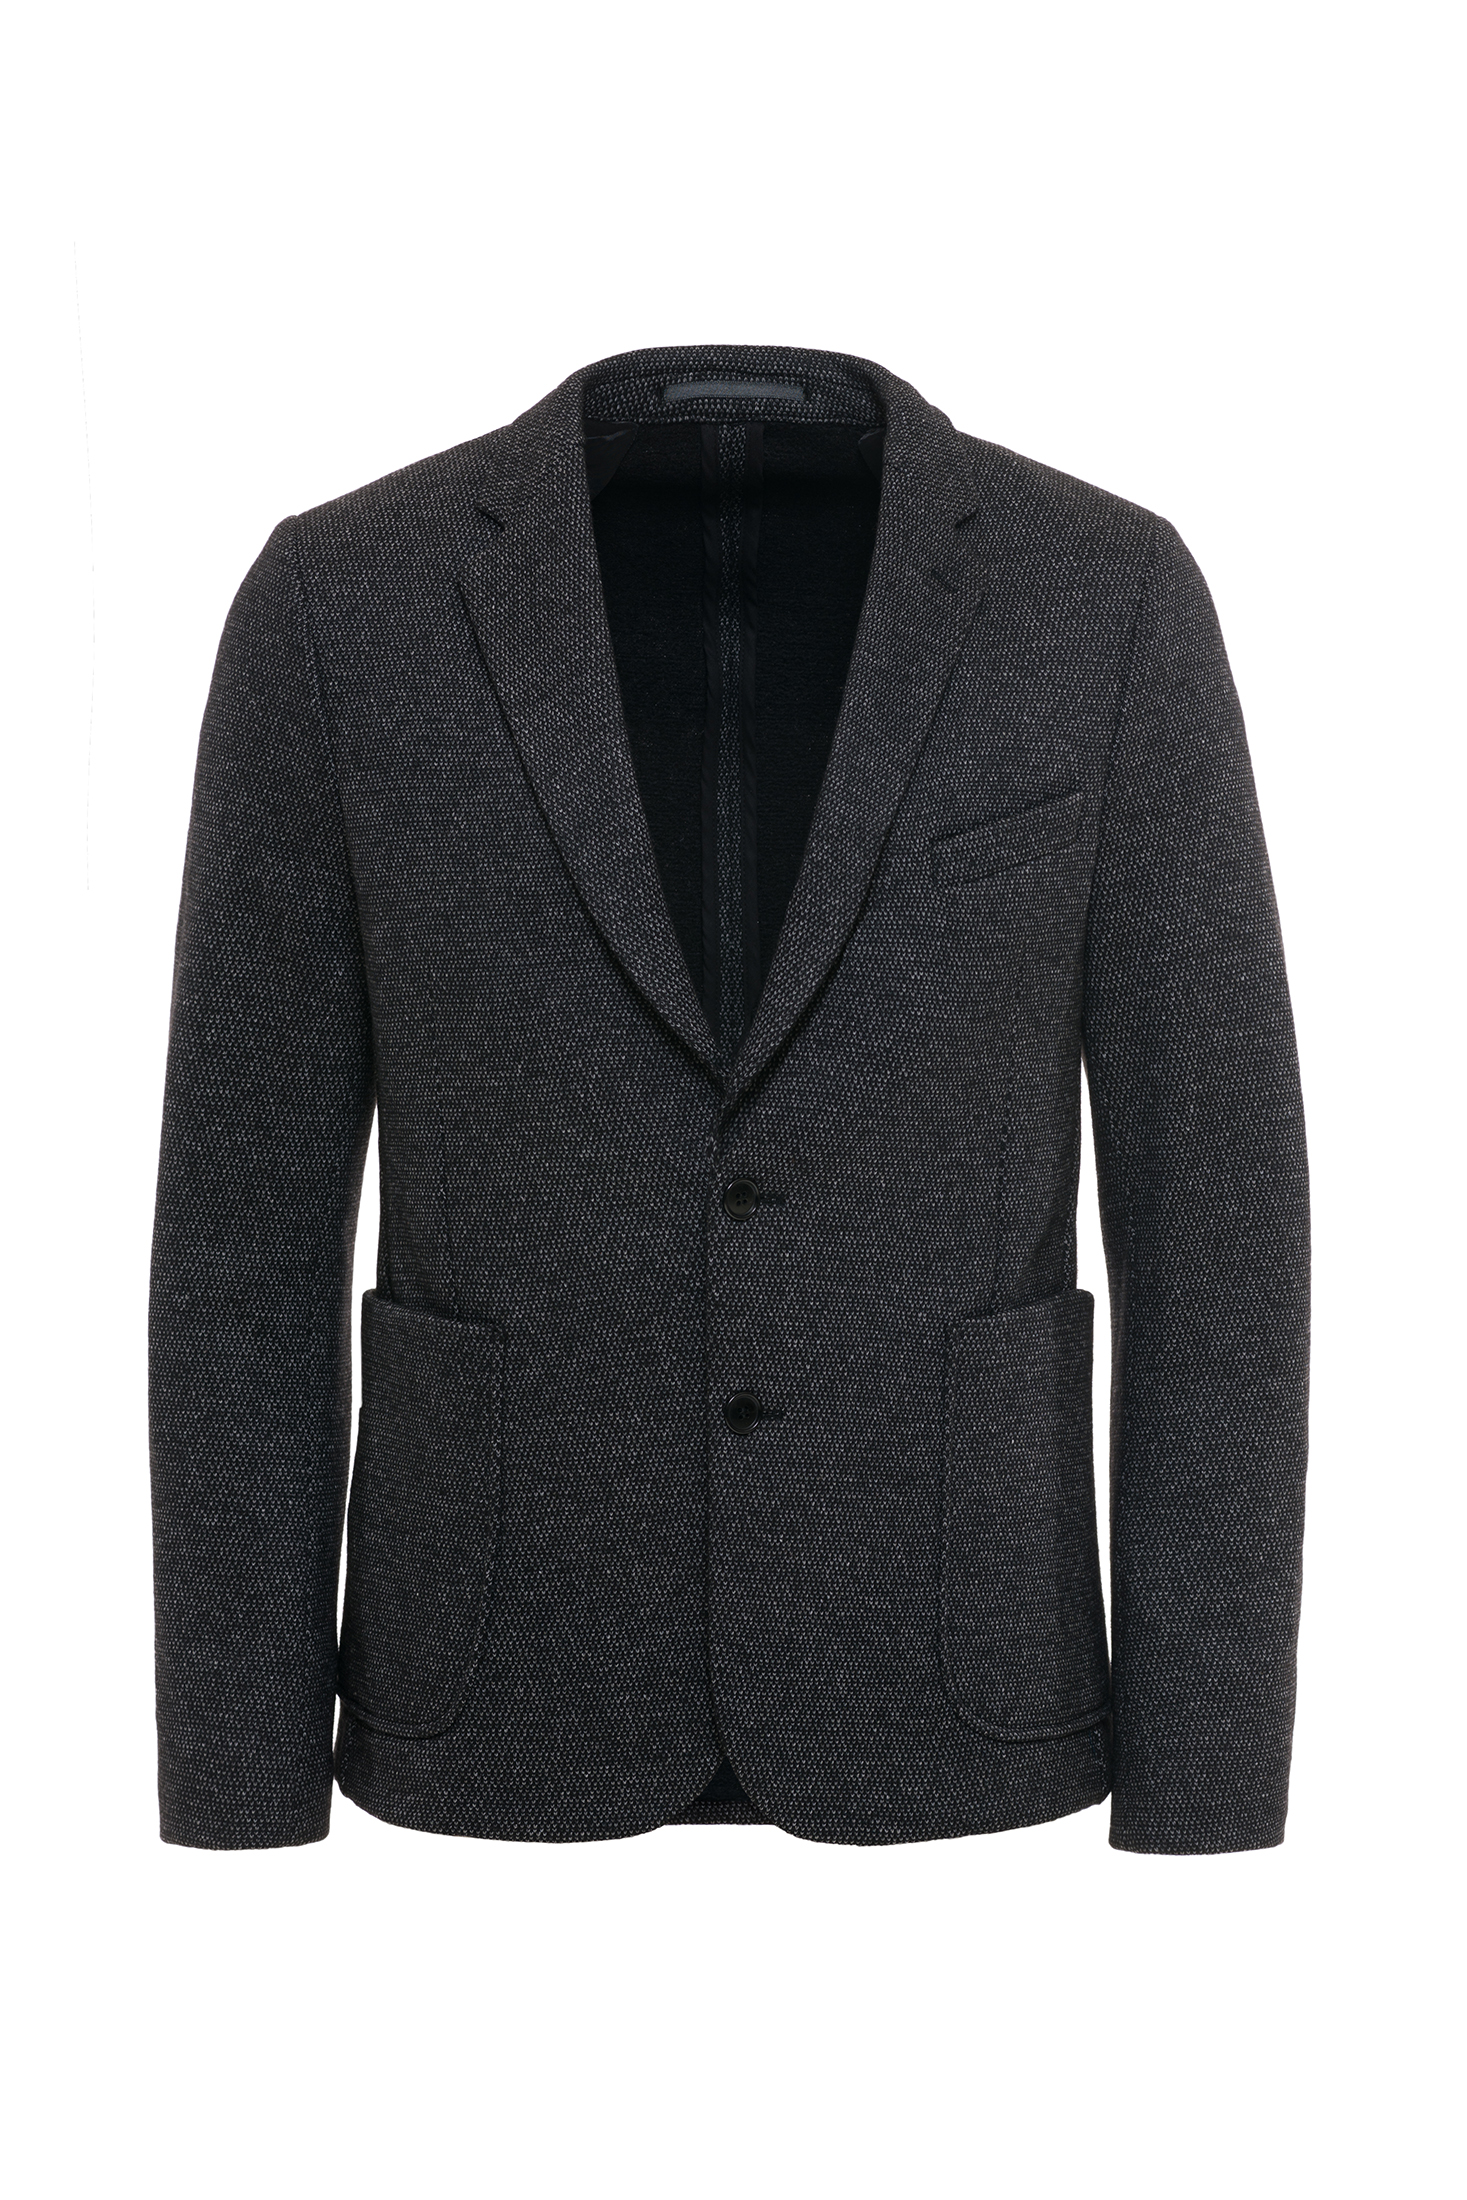 TEXTURED COMFORT KNITTED JACKET